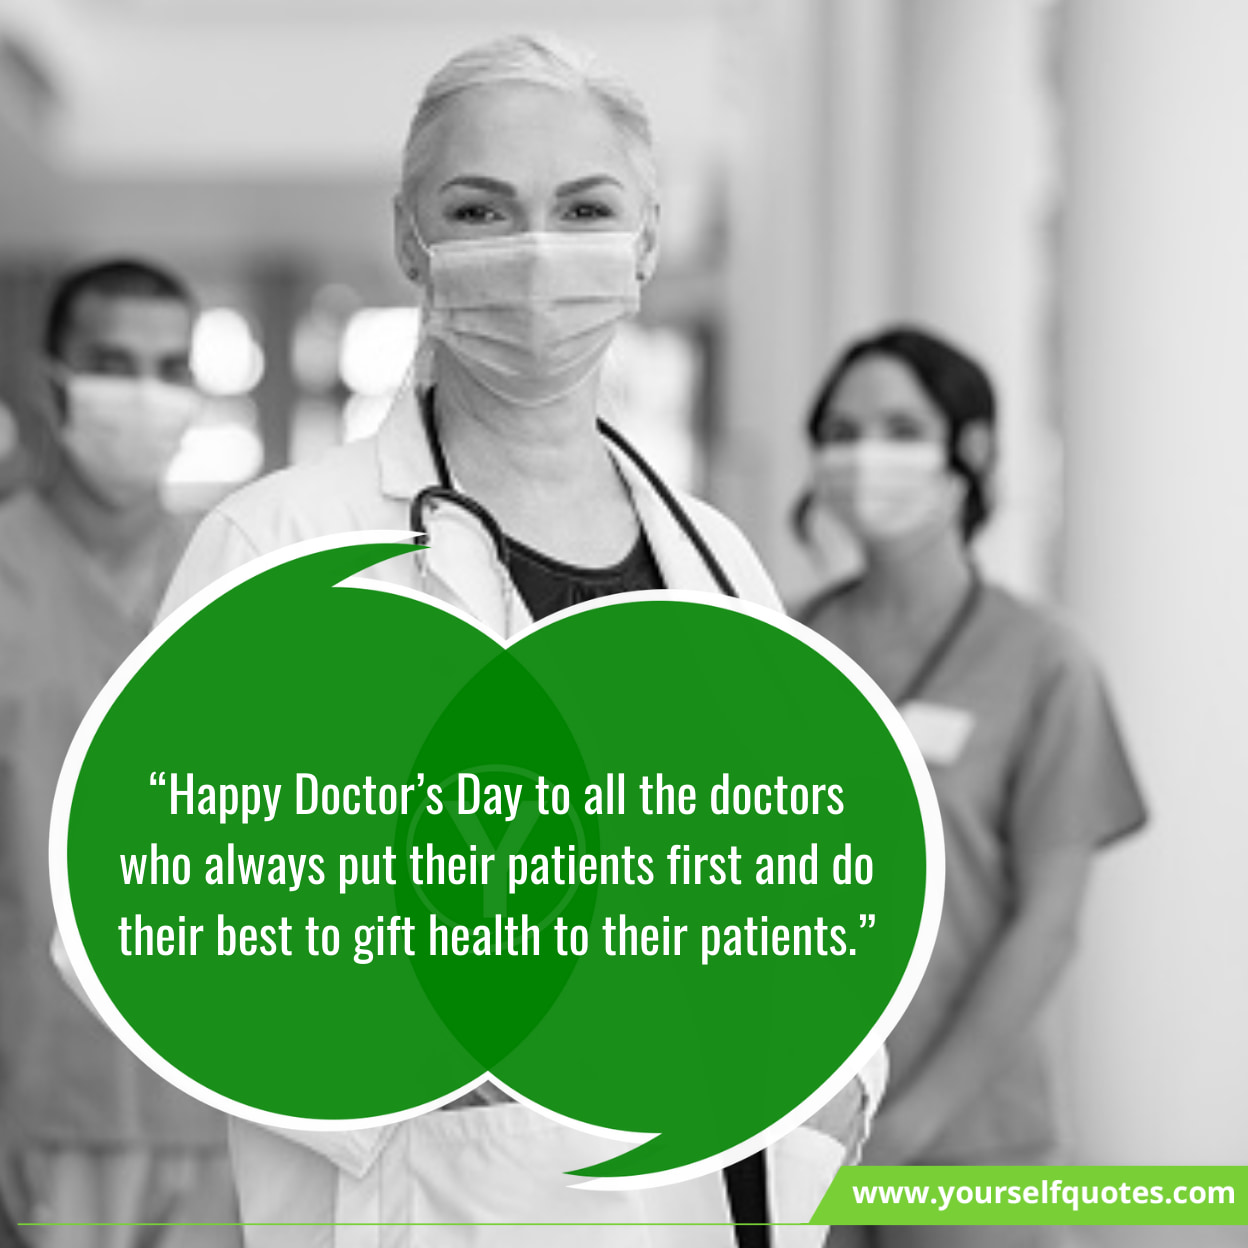 Doctors' Day Wishes